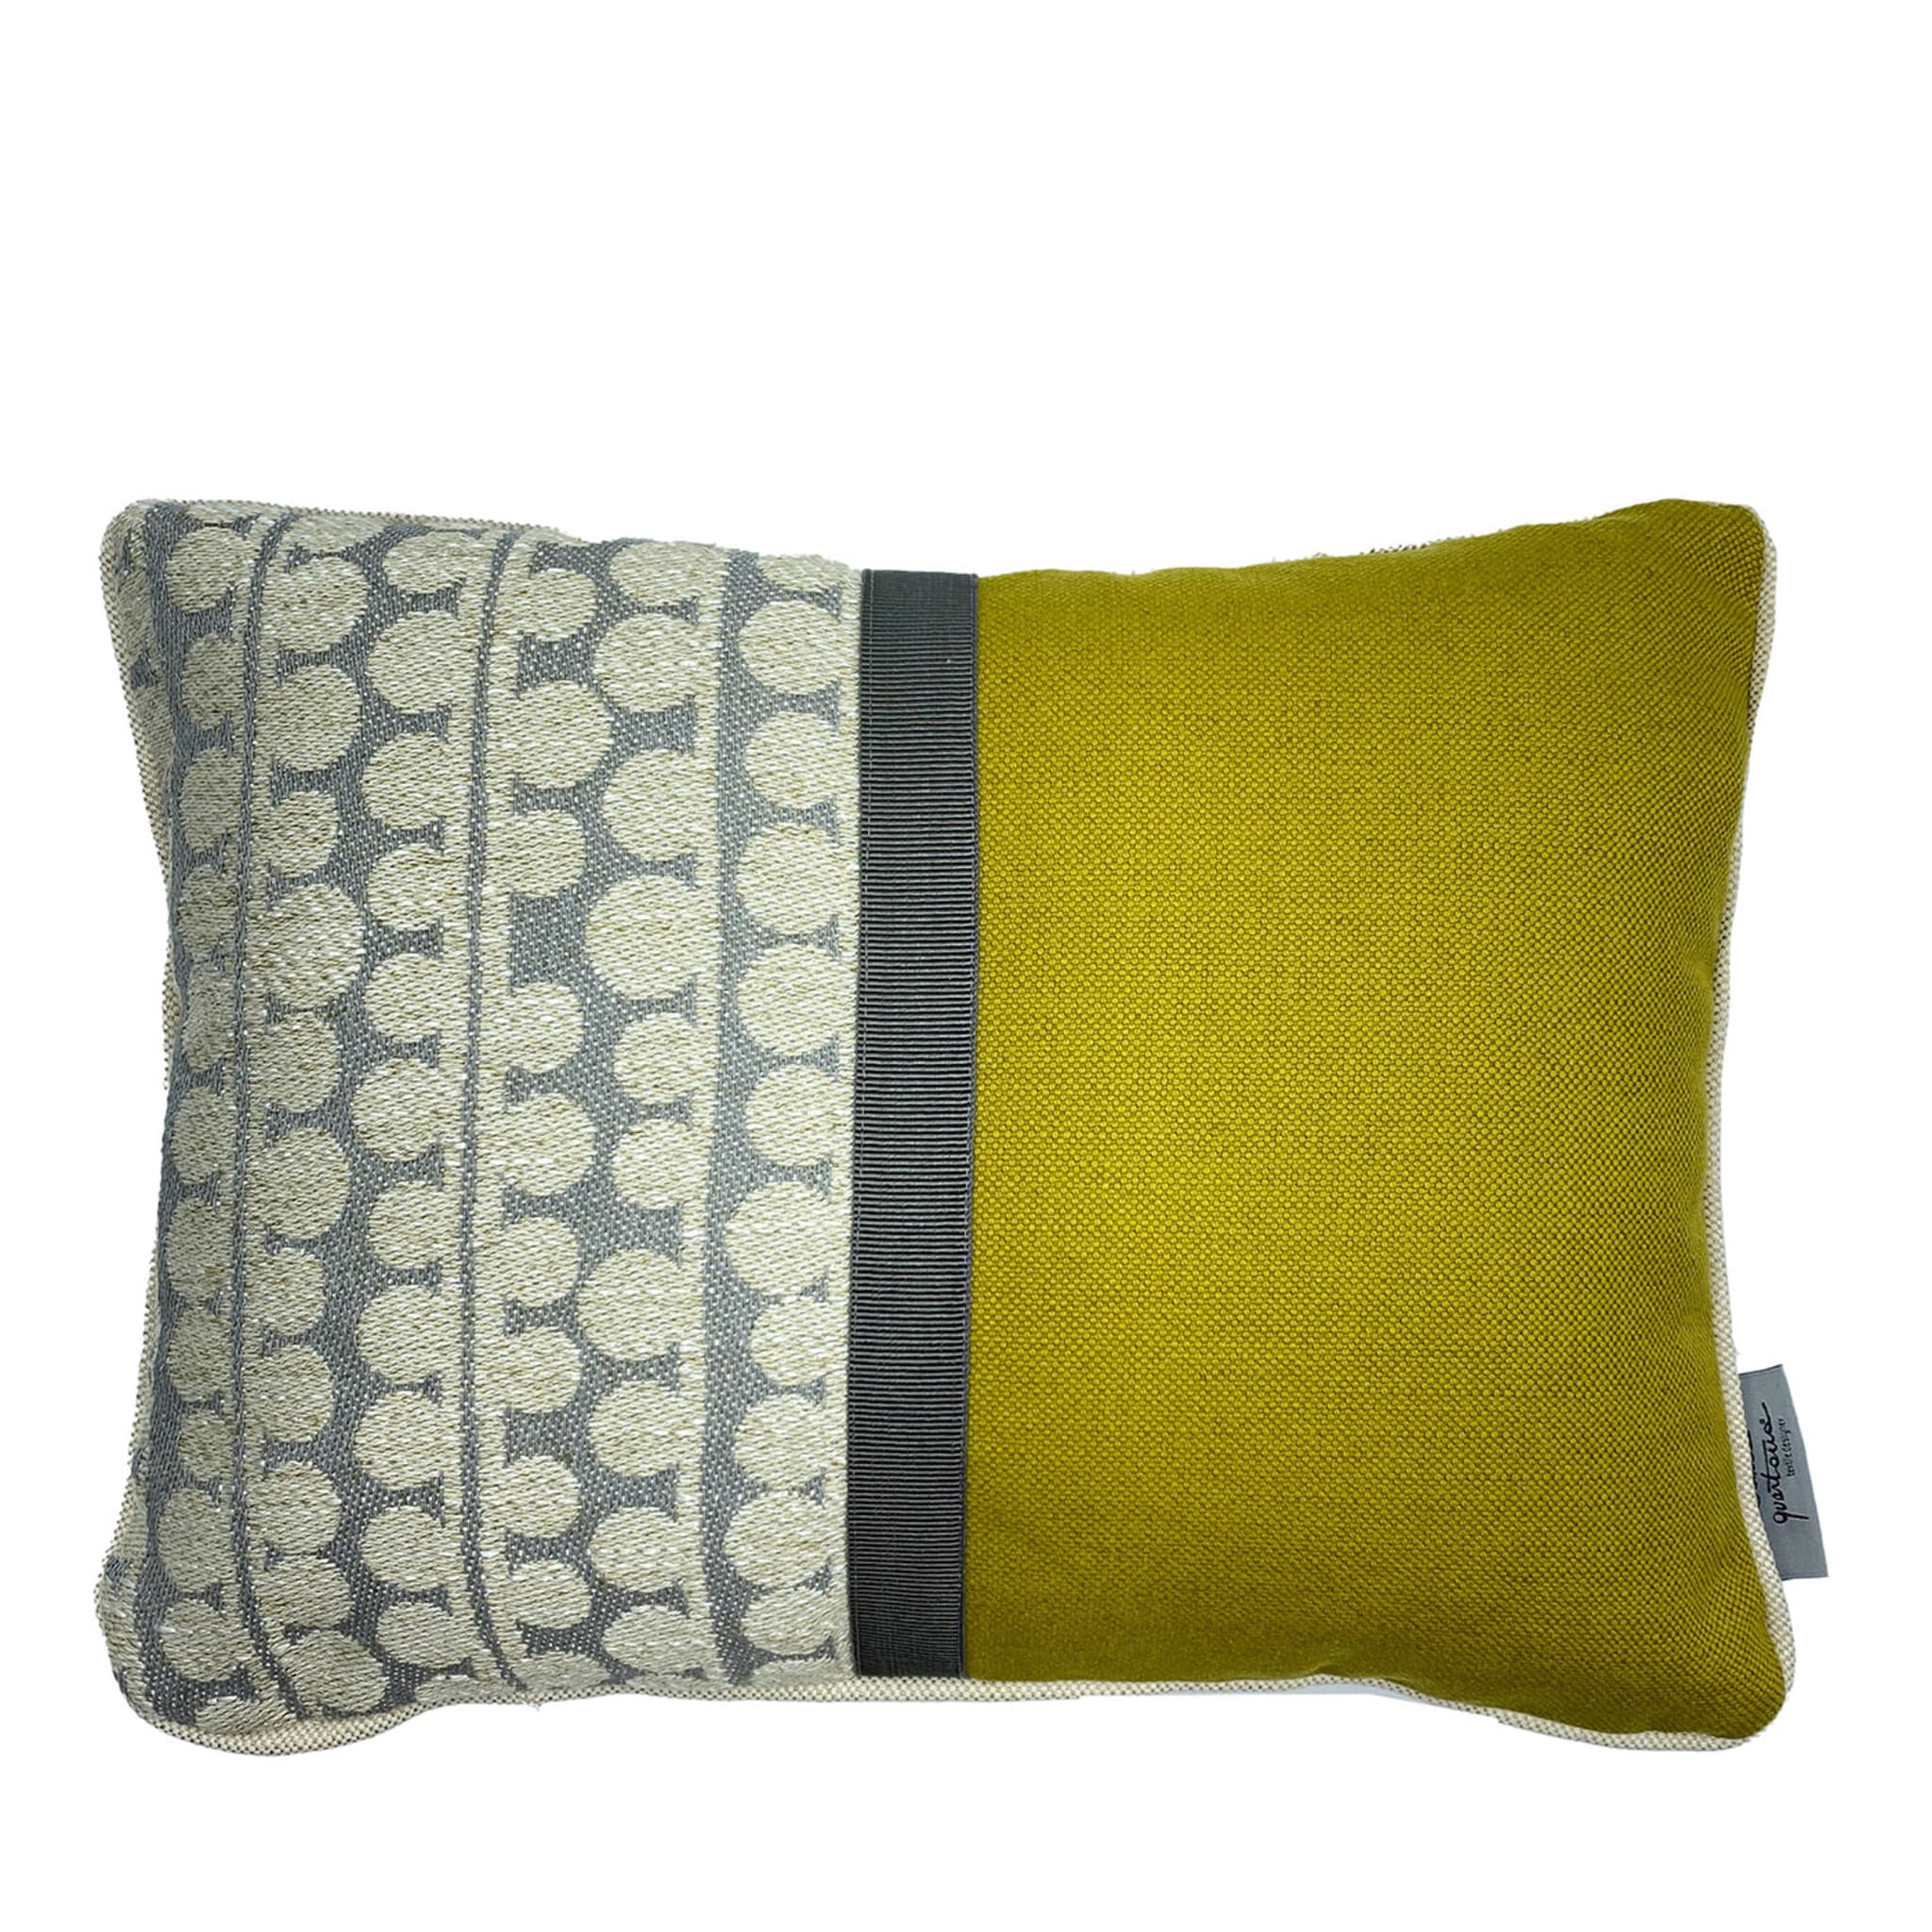 Bouclé Patterned Gray/Olive Green Rectangular Cushion - Main view